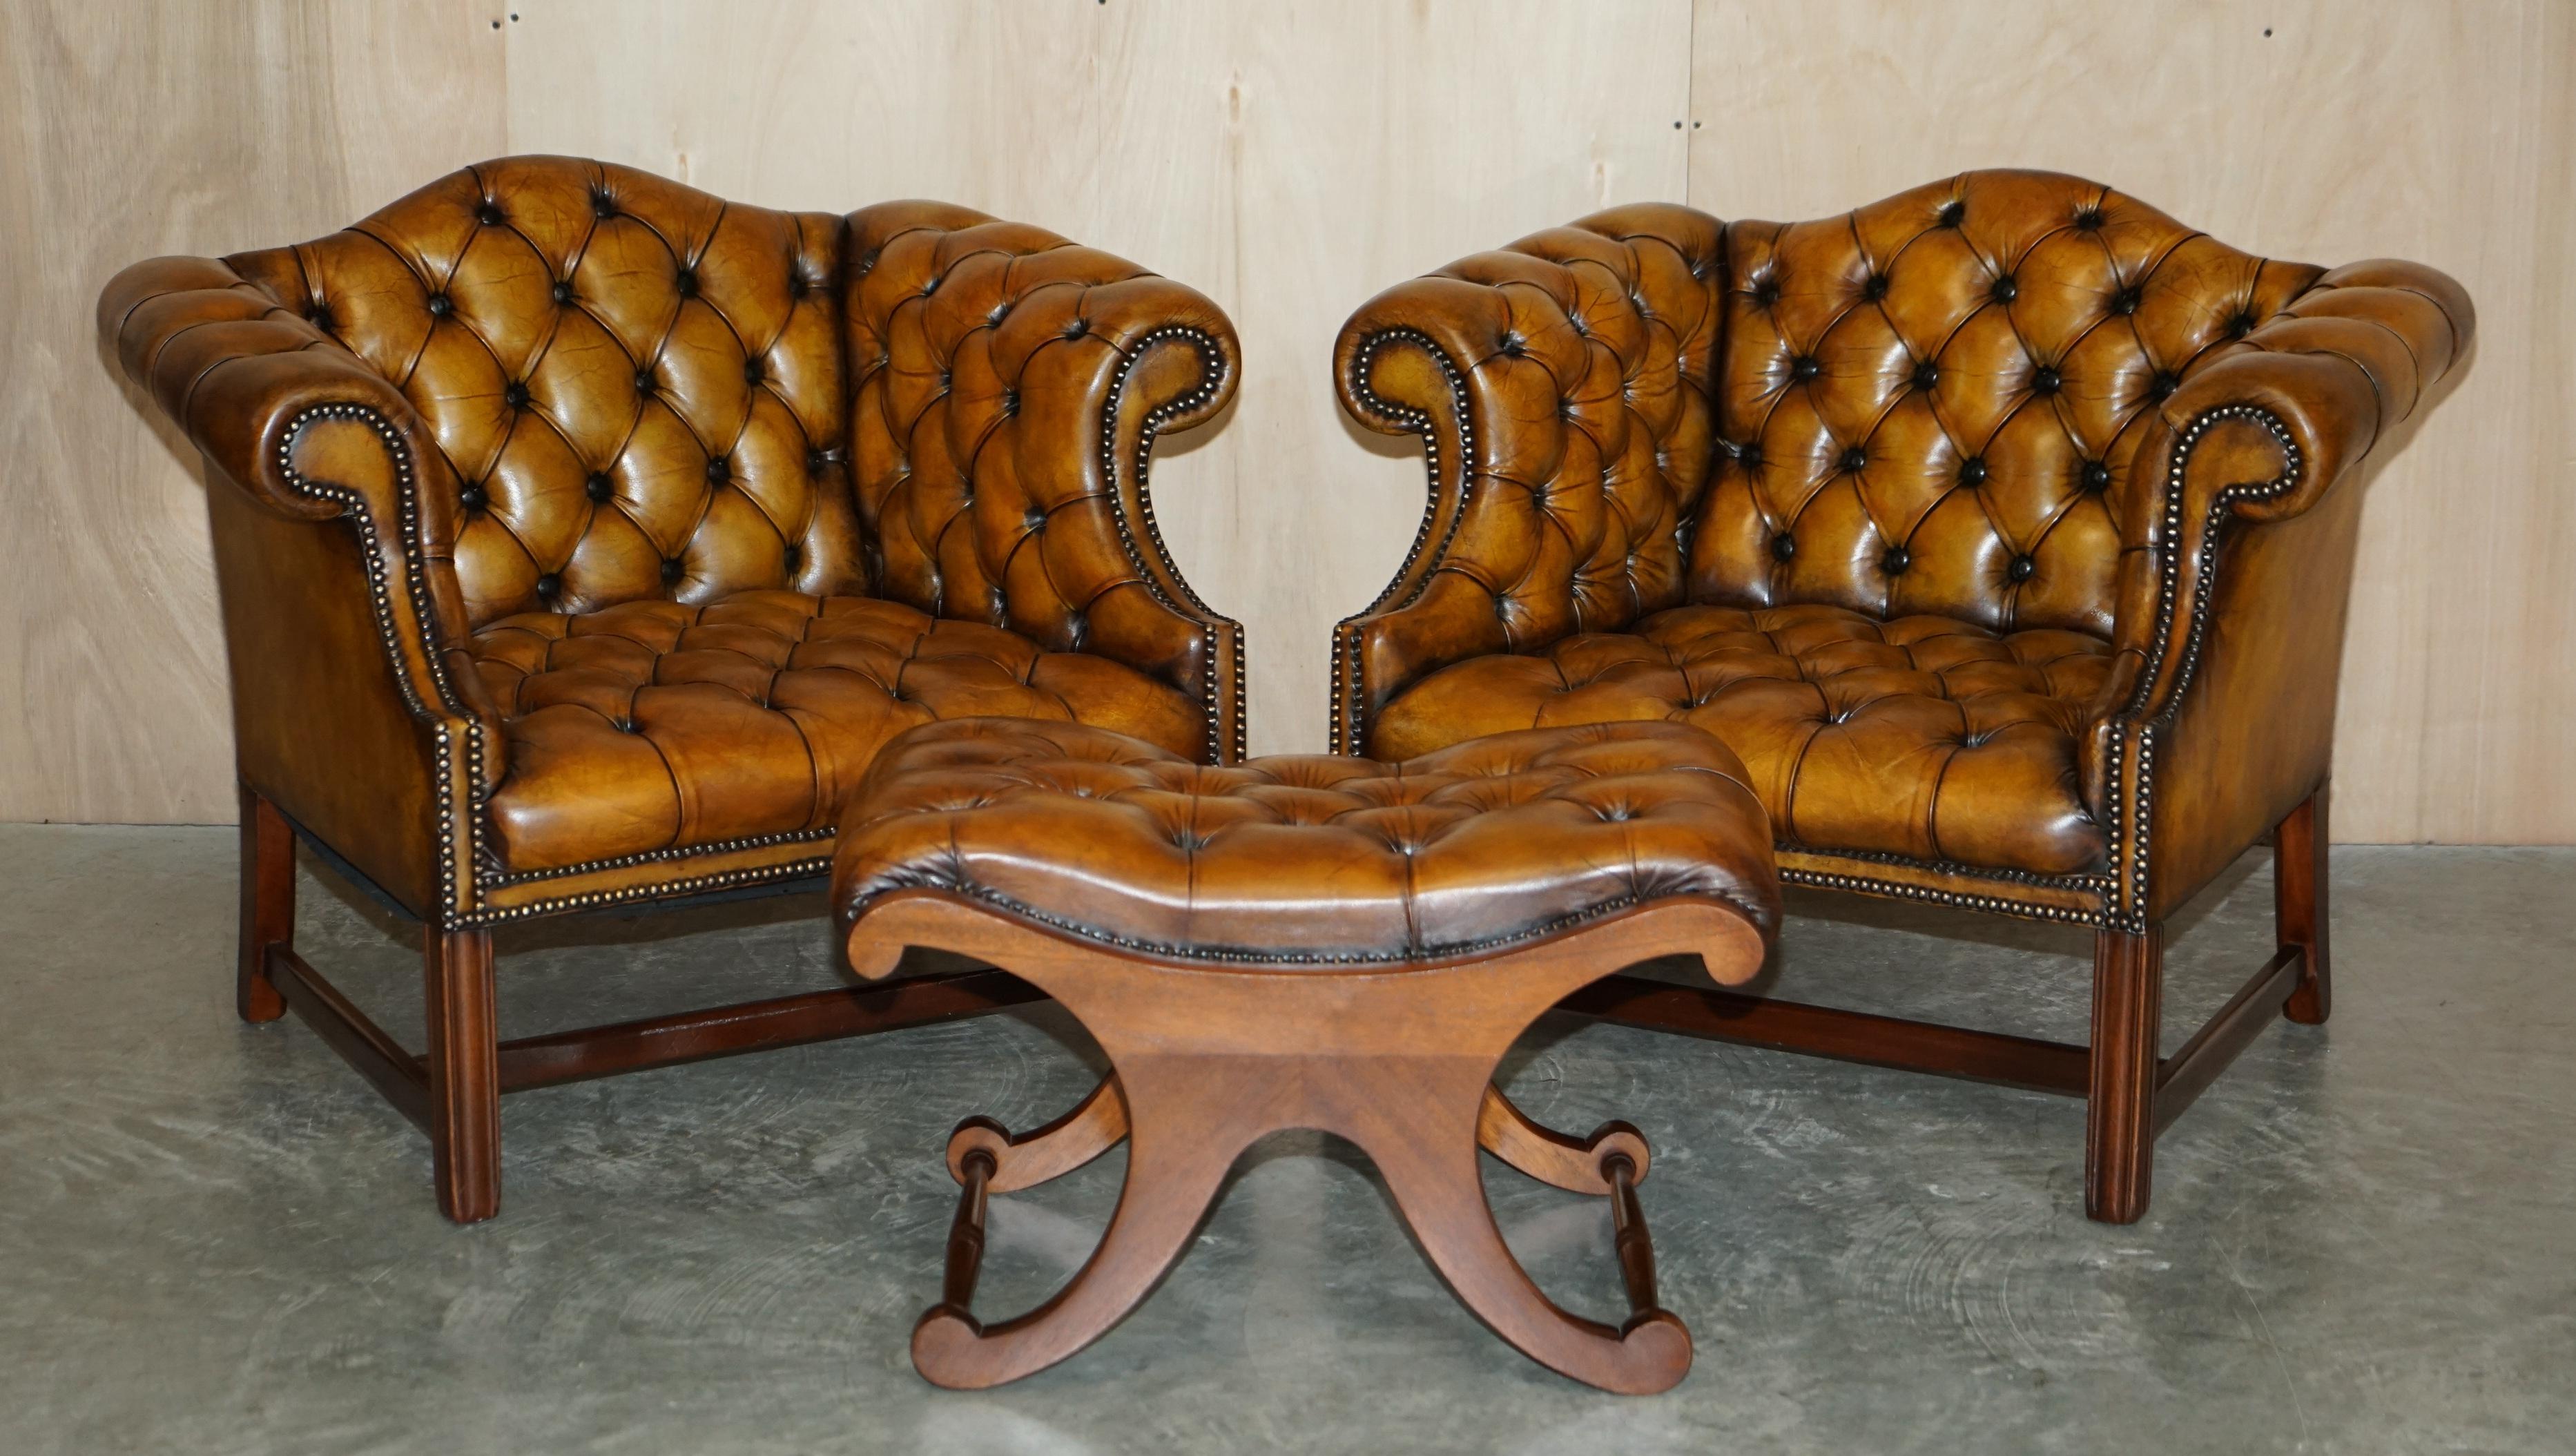 We are delighted to offer for sale this absolutely stunning, Victorian circa 1880 fully restored Chesterfield Whisky brown leather Library suite.

A very rare find, I never come across original sets of four pieces from this era and especially not